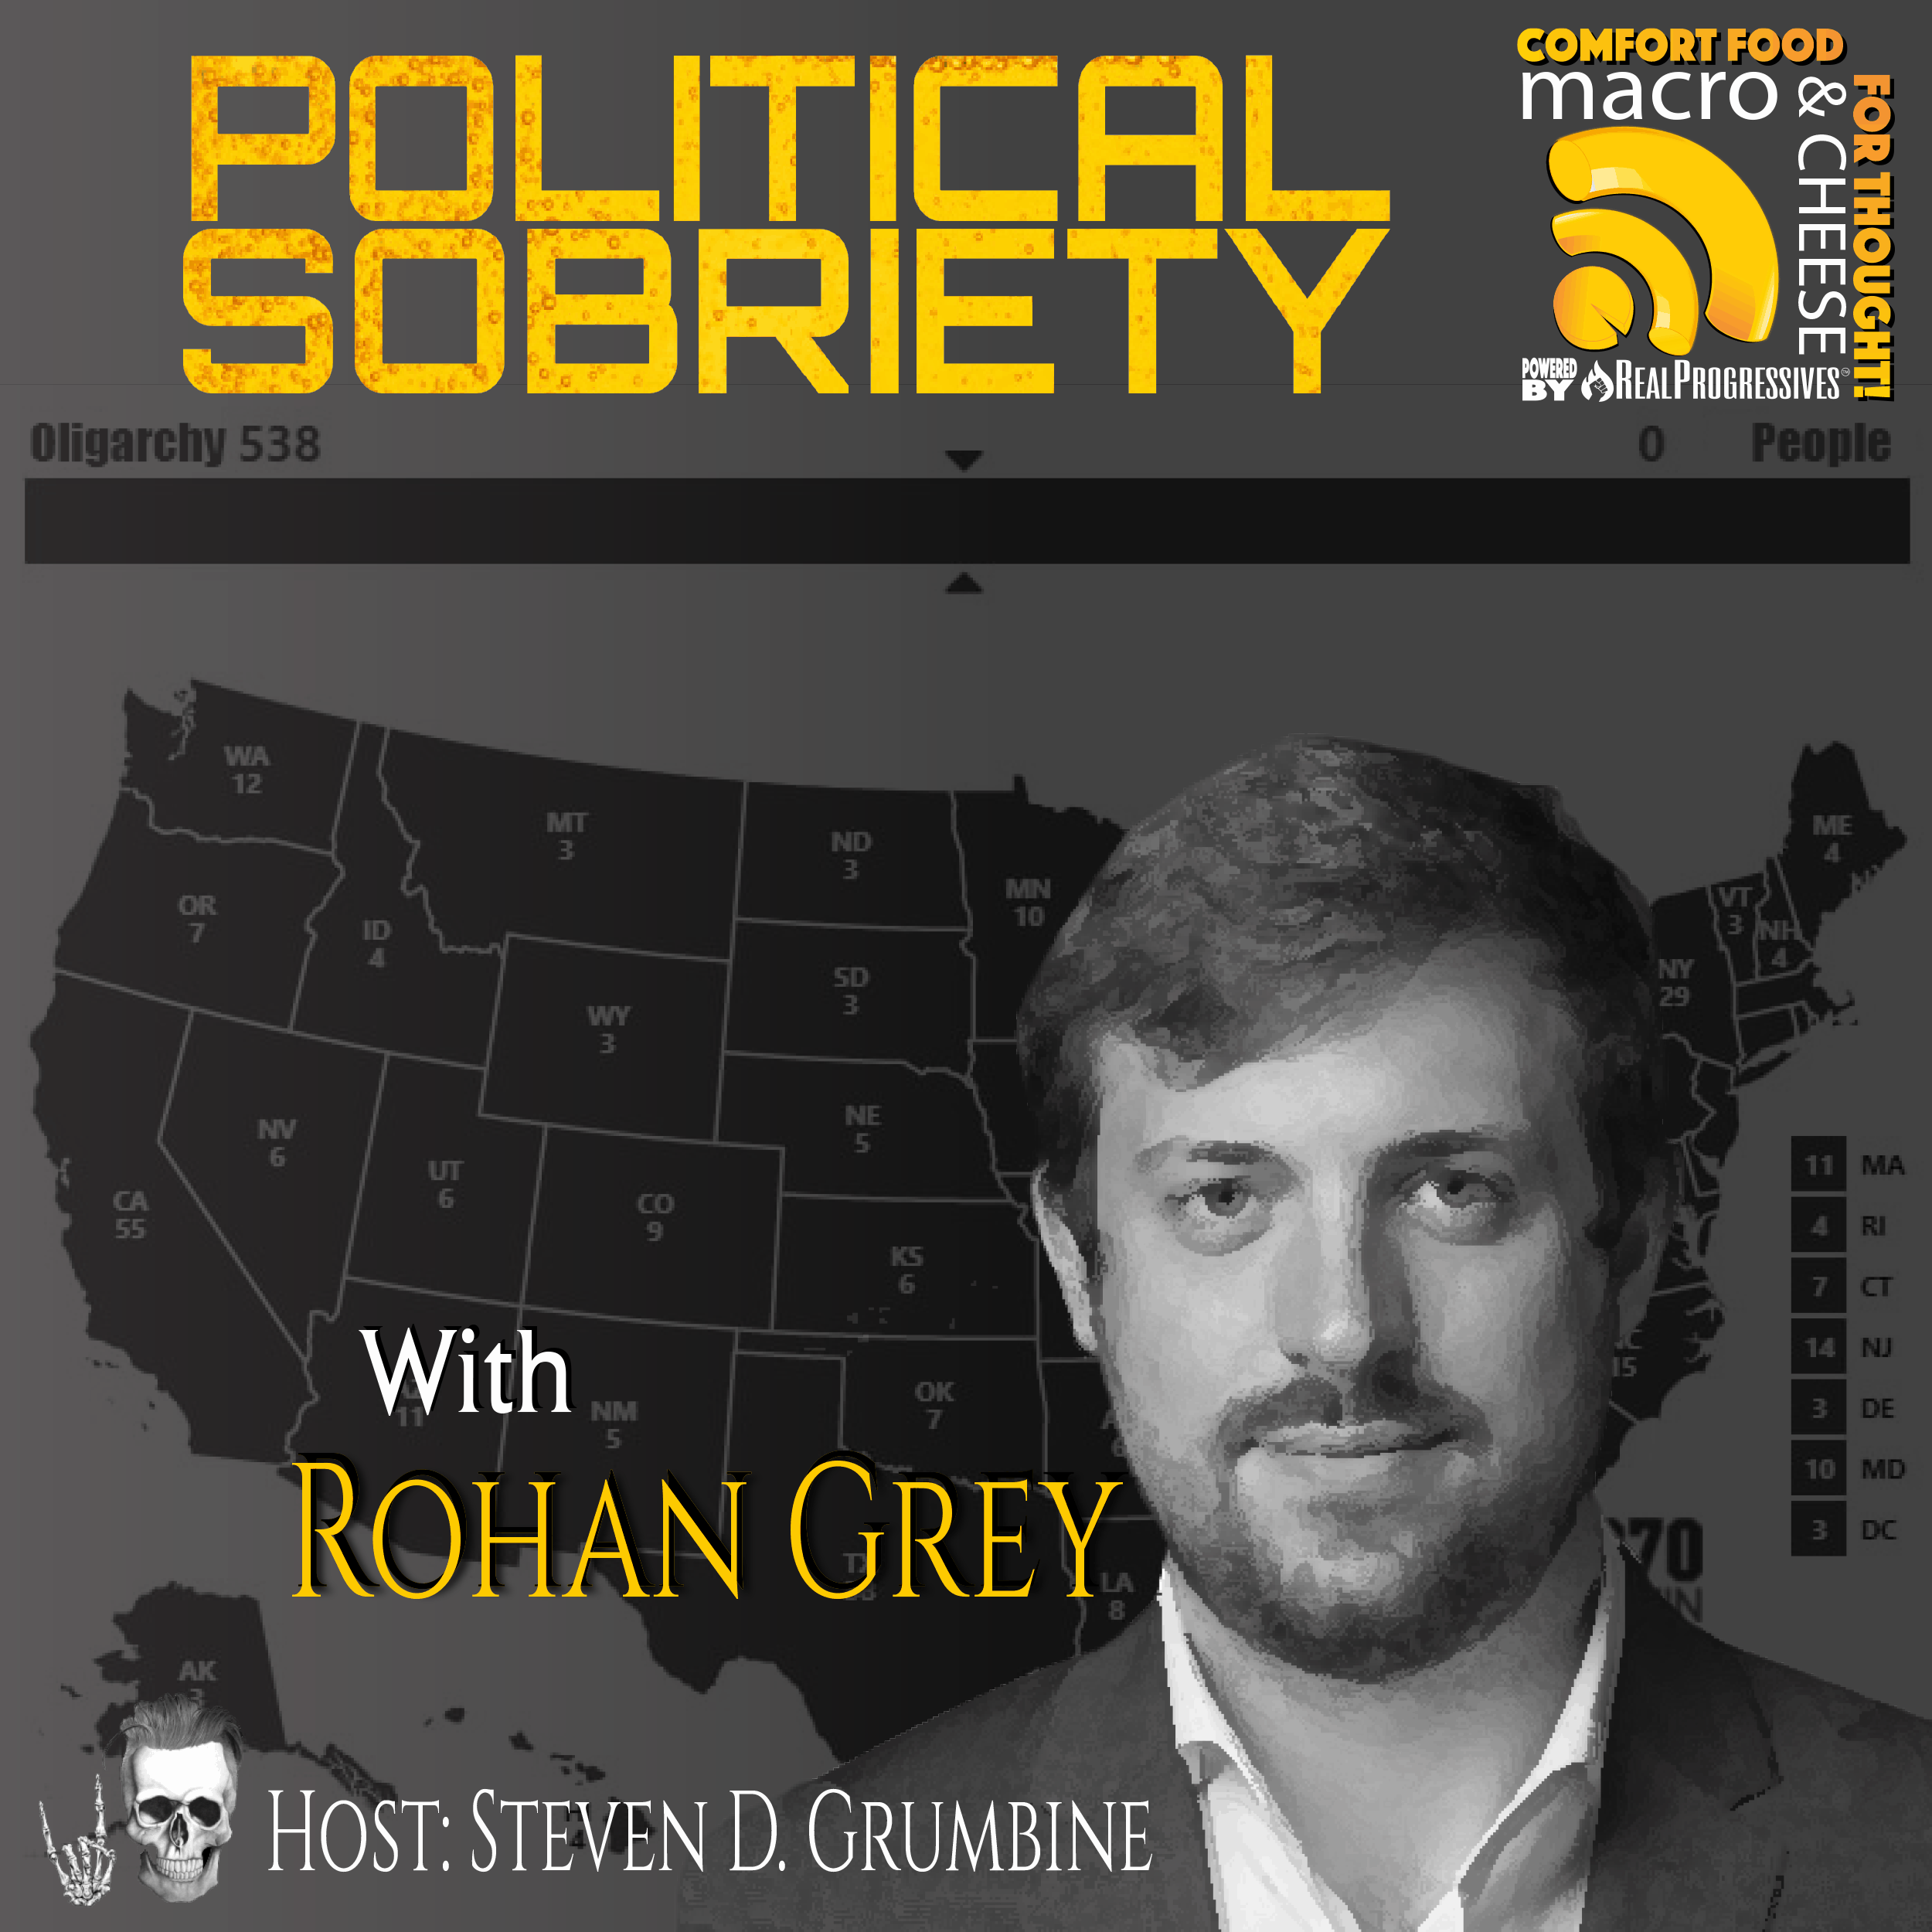 Episode 94 - Political Sobriety with Rohan Grey